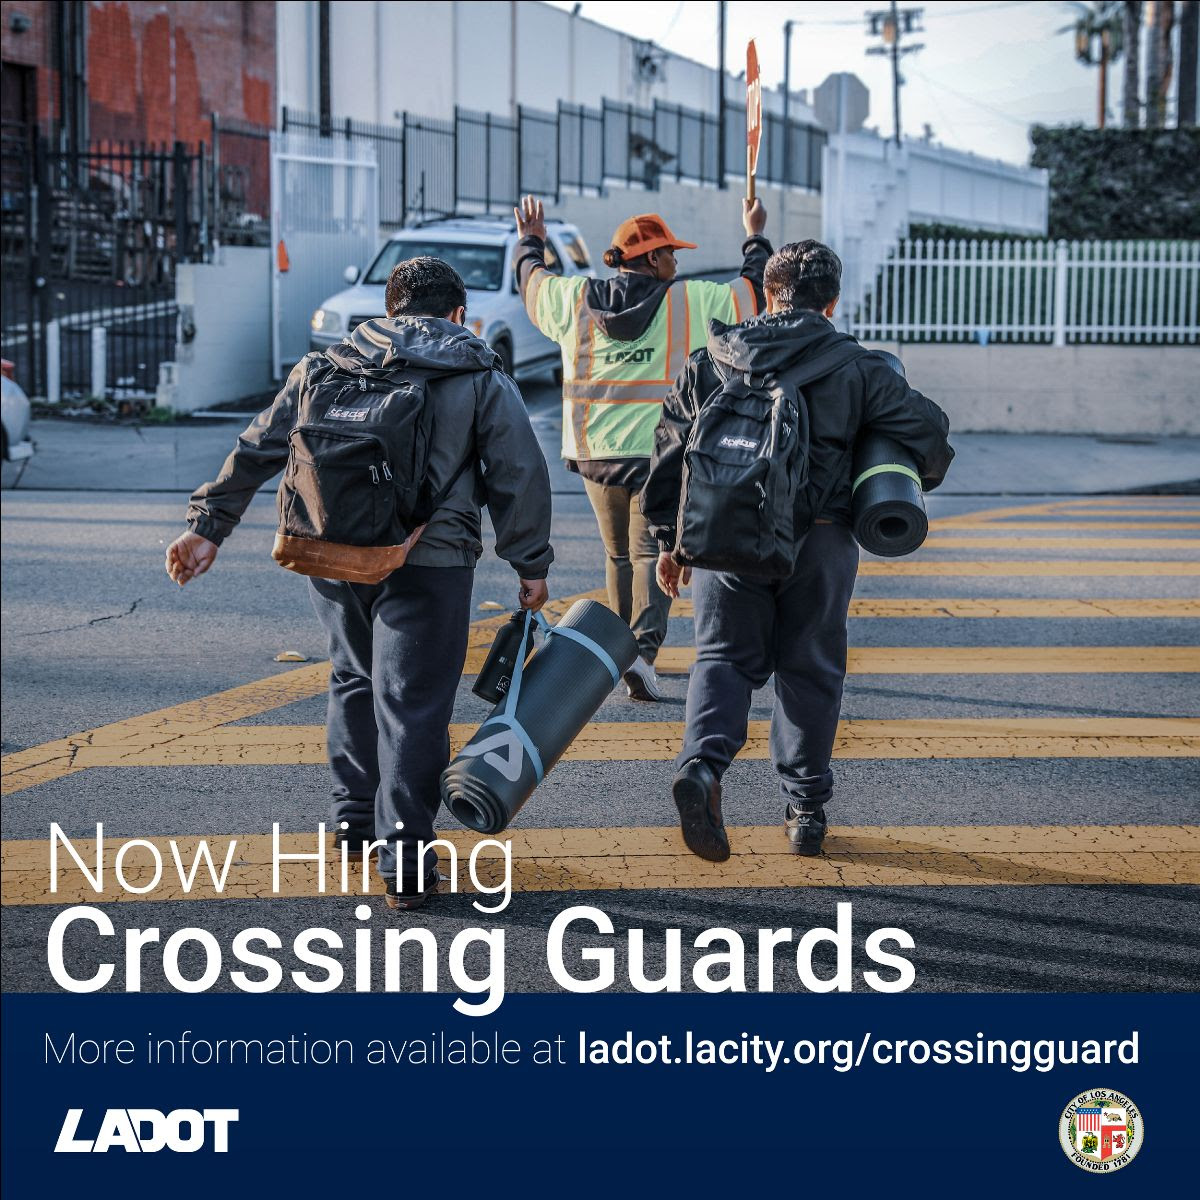 Img LADOT Now Hiring Crossing Guards